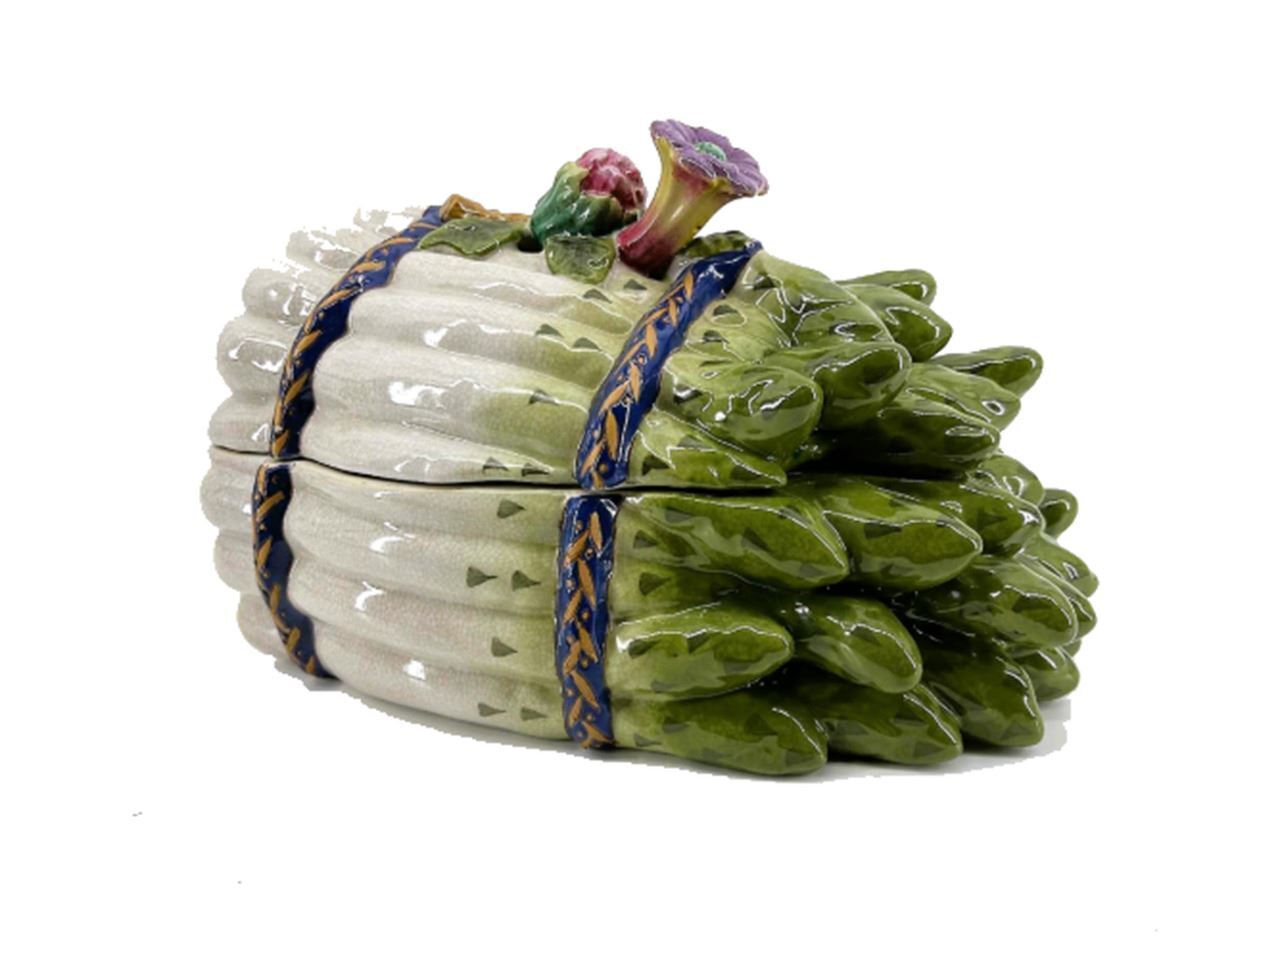 Large Majolica Ceramic Asparagus and Flower Tureen. Vintage. With lid.